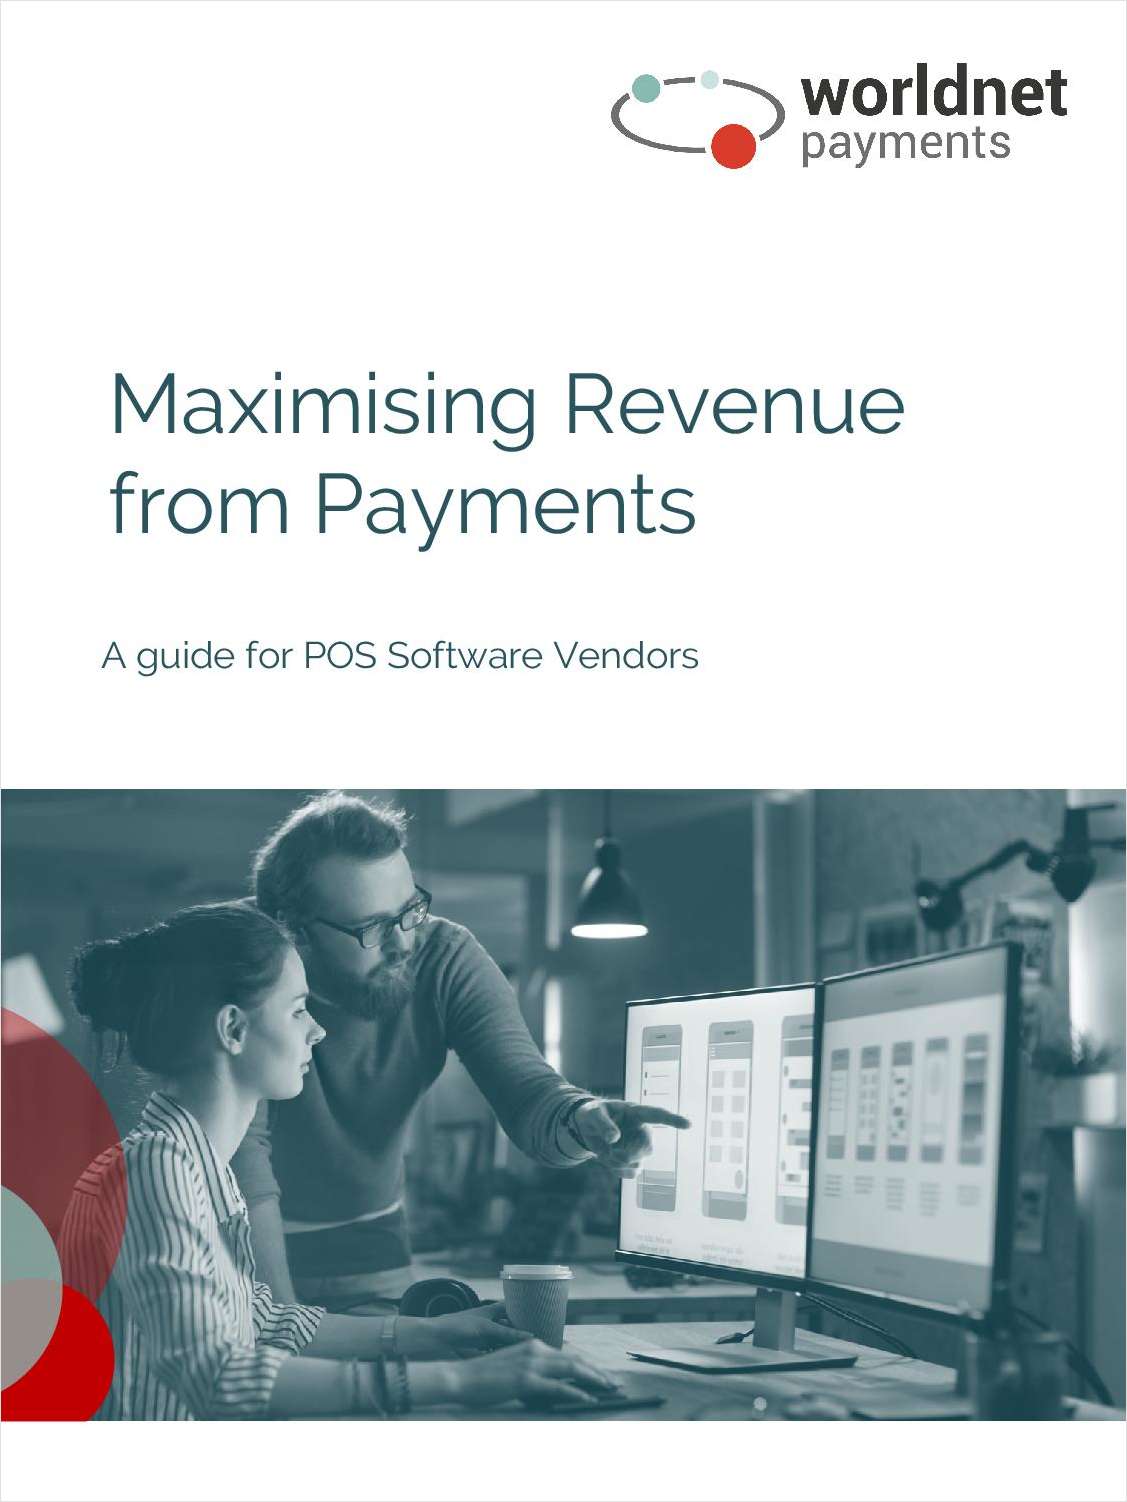 5 Ways to Maximize Revenue from Your POS Software with Payments